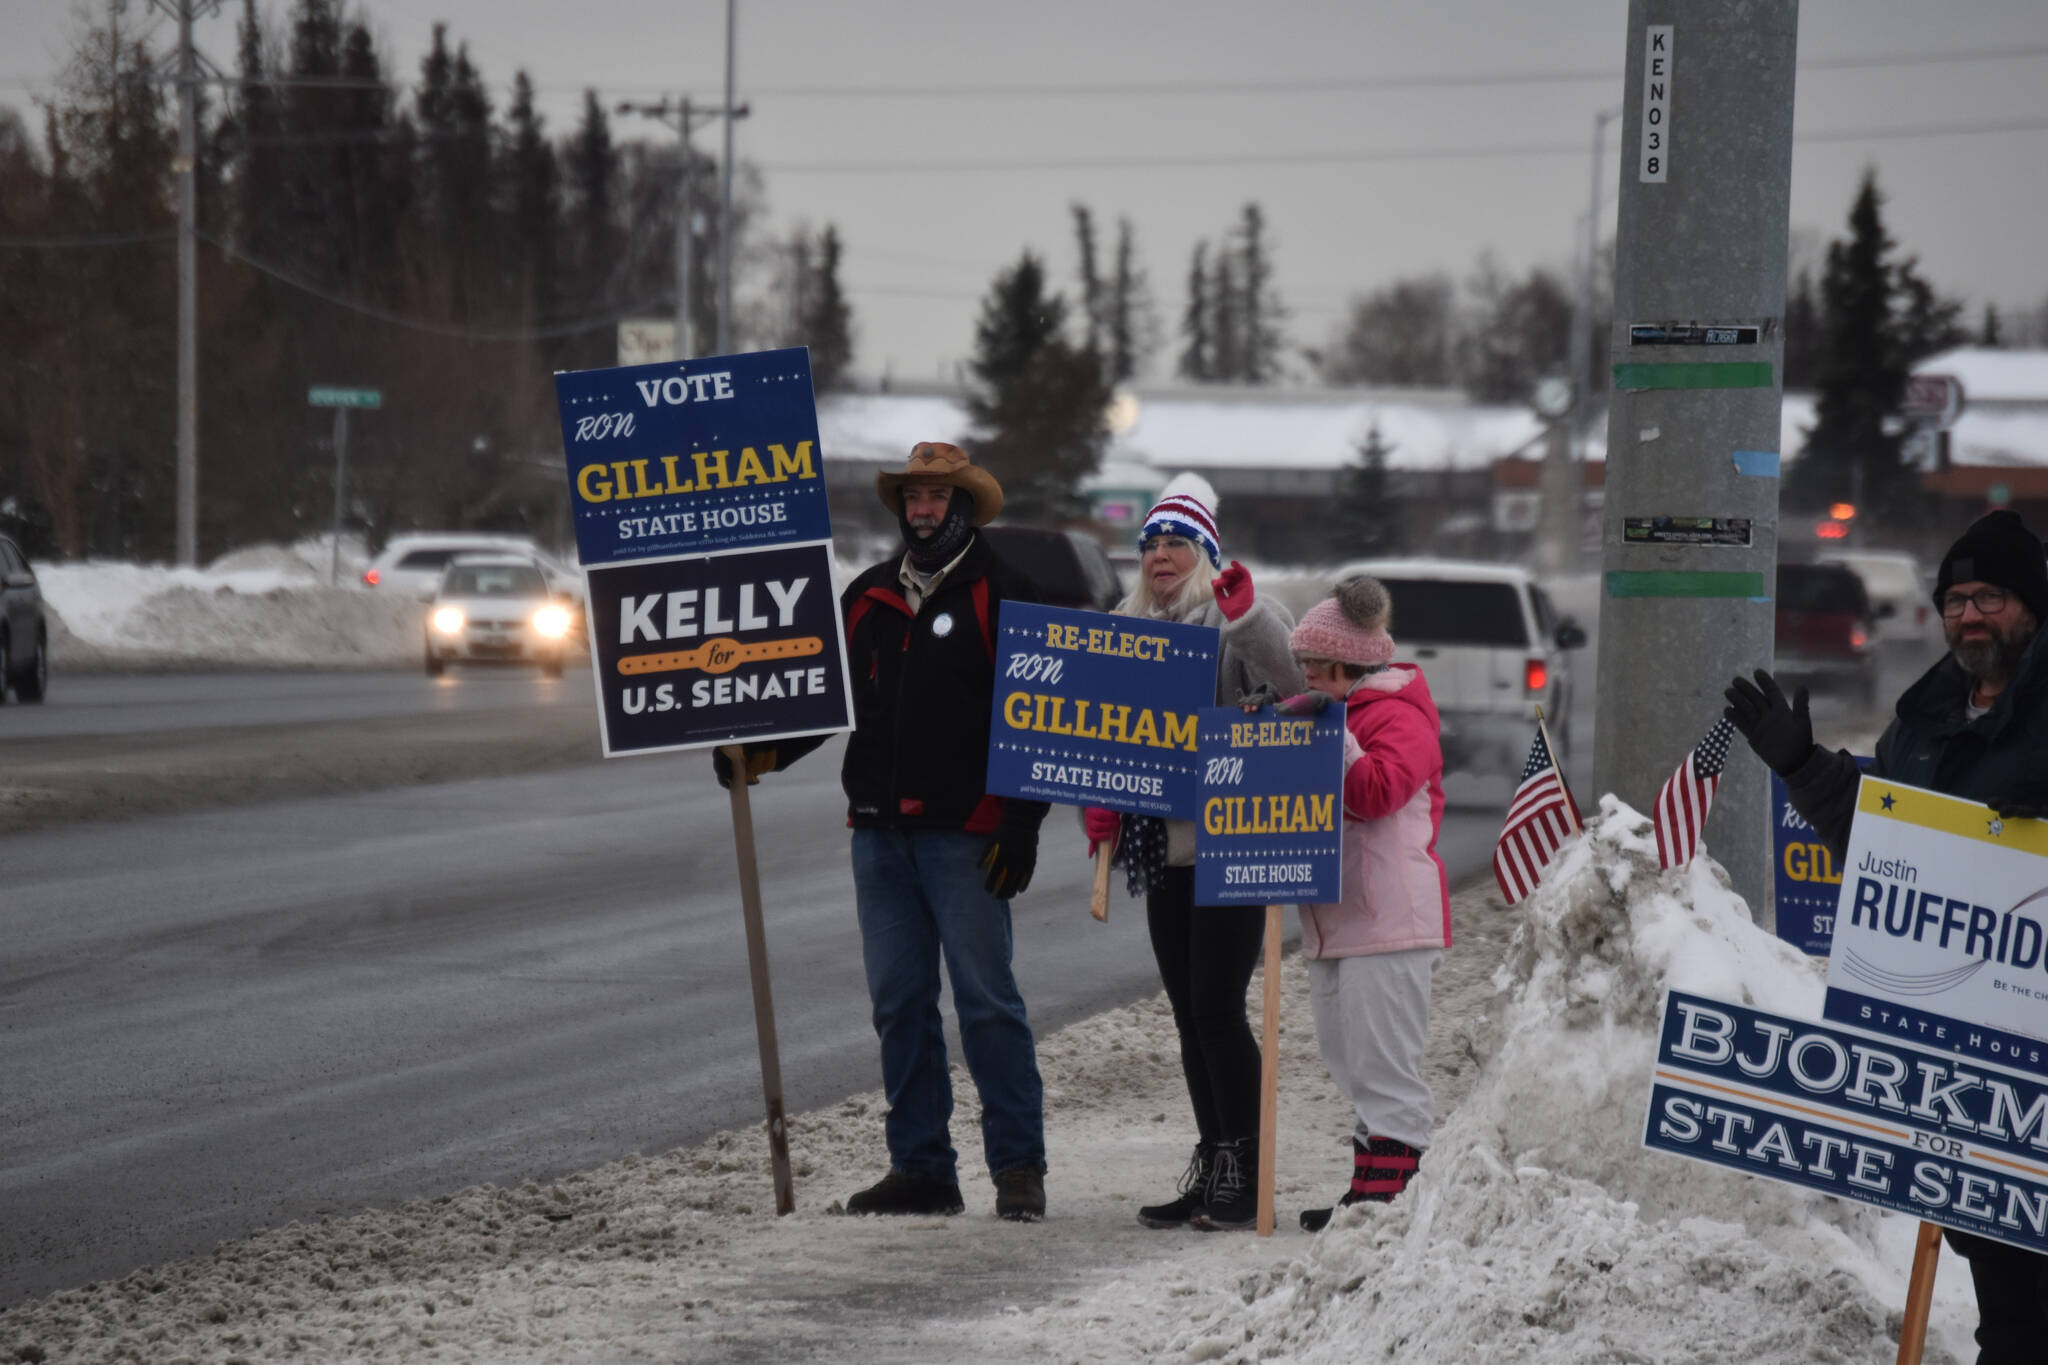 Candidate Ron Gillham,and his family are seen on Election Day, Nov. 8, 2022, at the intersection of the Kenai Spur Highway and Bridge Access Road in Kenai, Alaska. (Jake Dye/Peninsula Clarion)